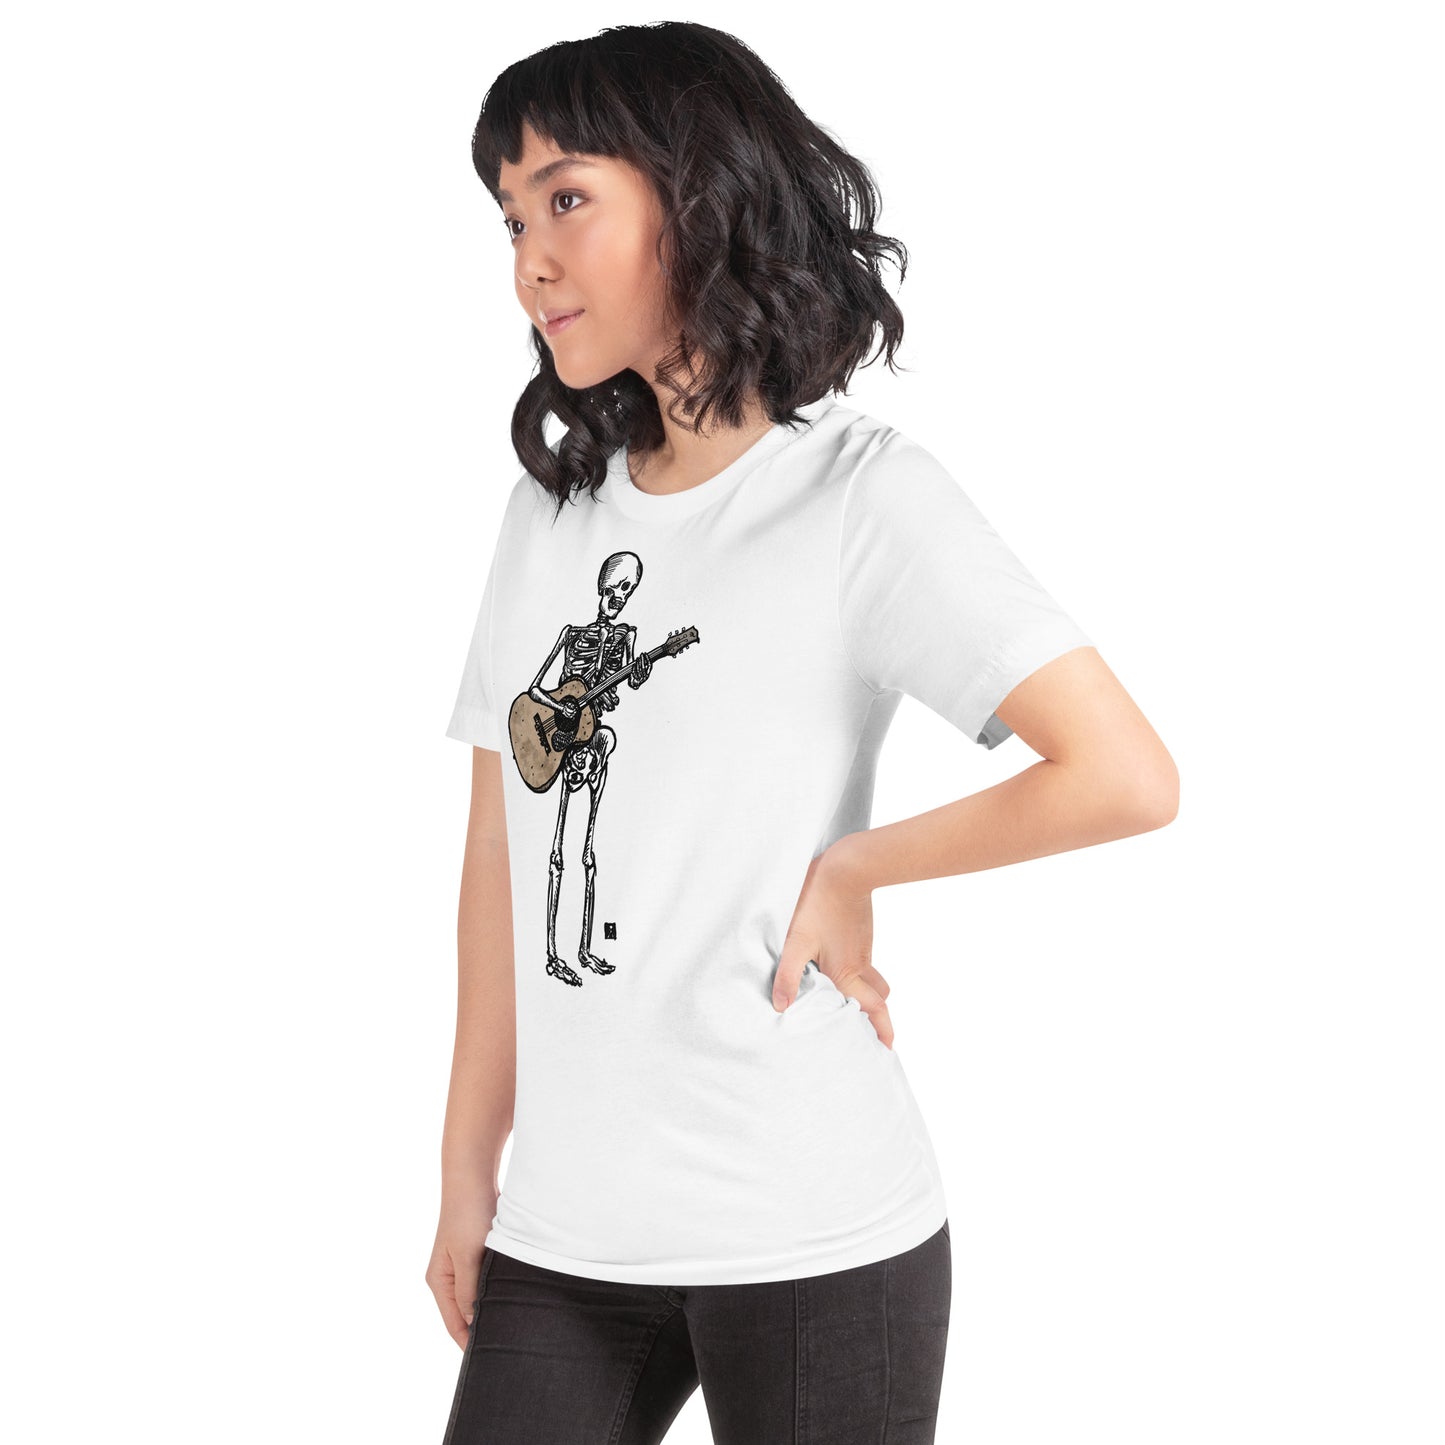 BellavanceInk: White T-Shirt With Skeletons Playing A Banjo, Guitar, Or Mandolin